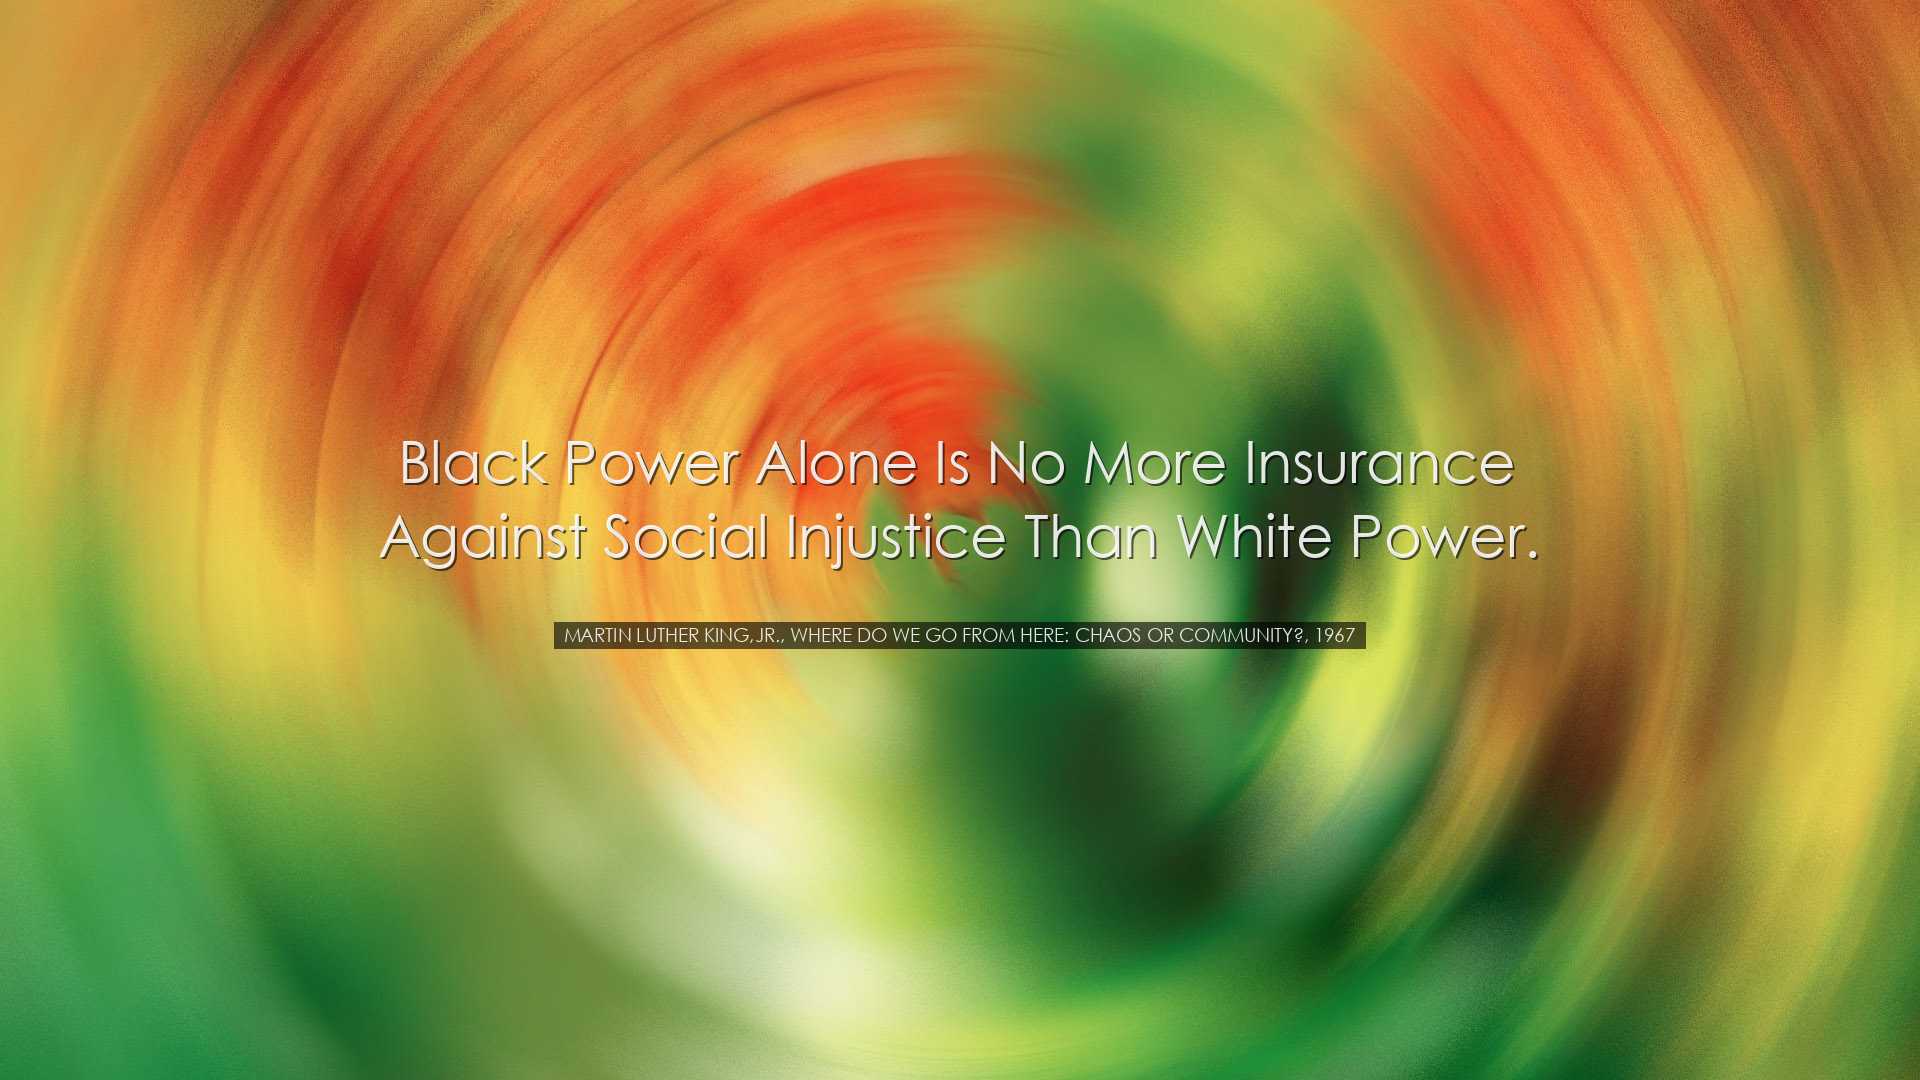 Black Power alone is no more insurance against social injustice th